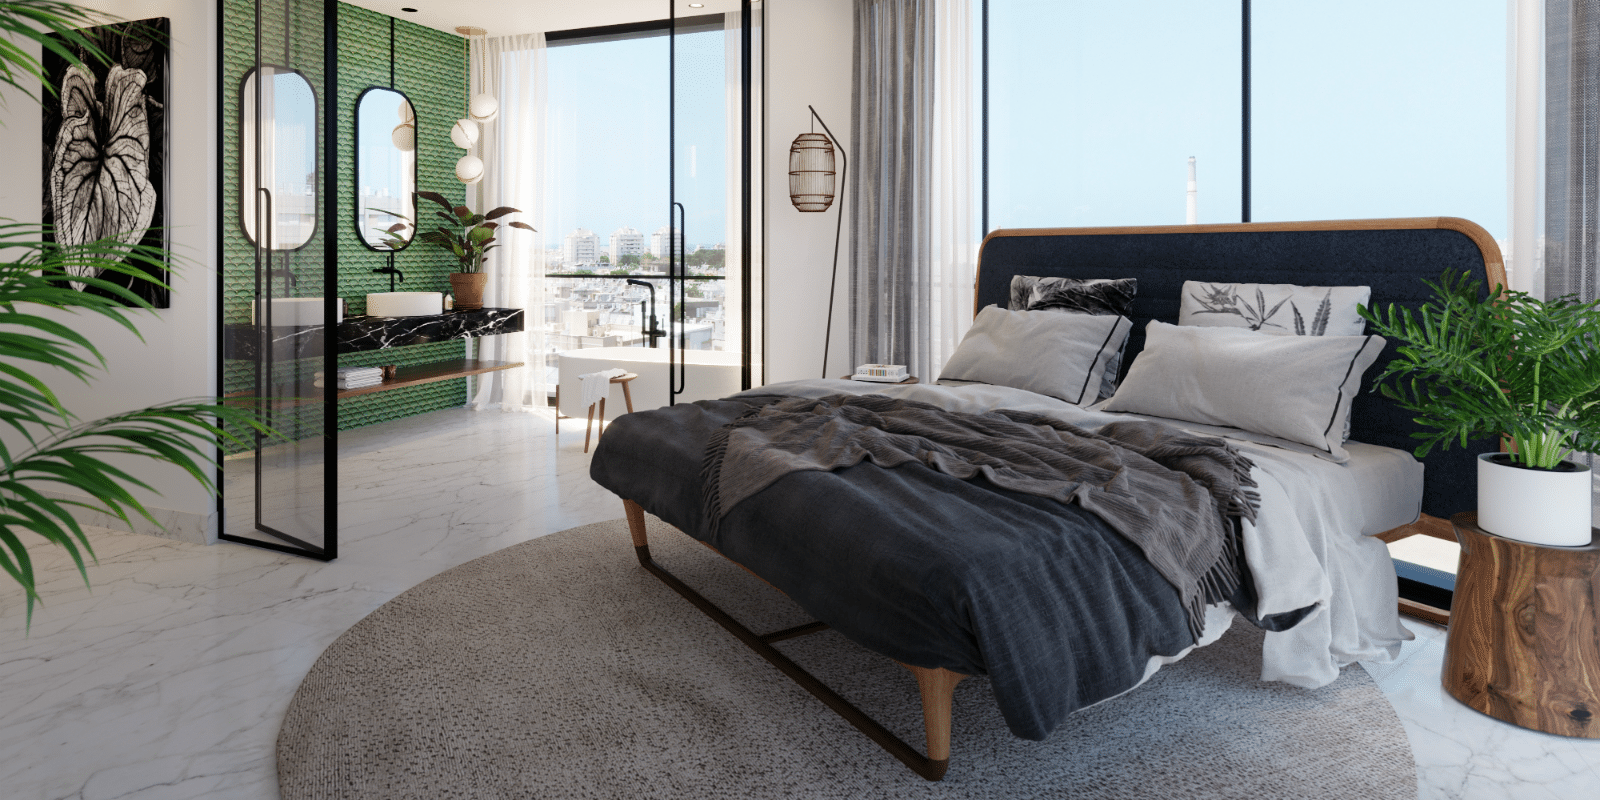 A 3d rendering of a bedroom with green walls and a view of the city.